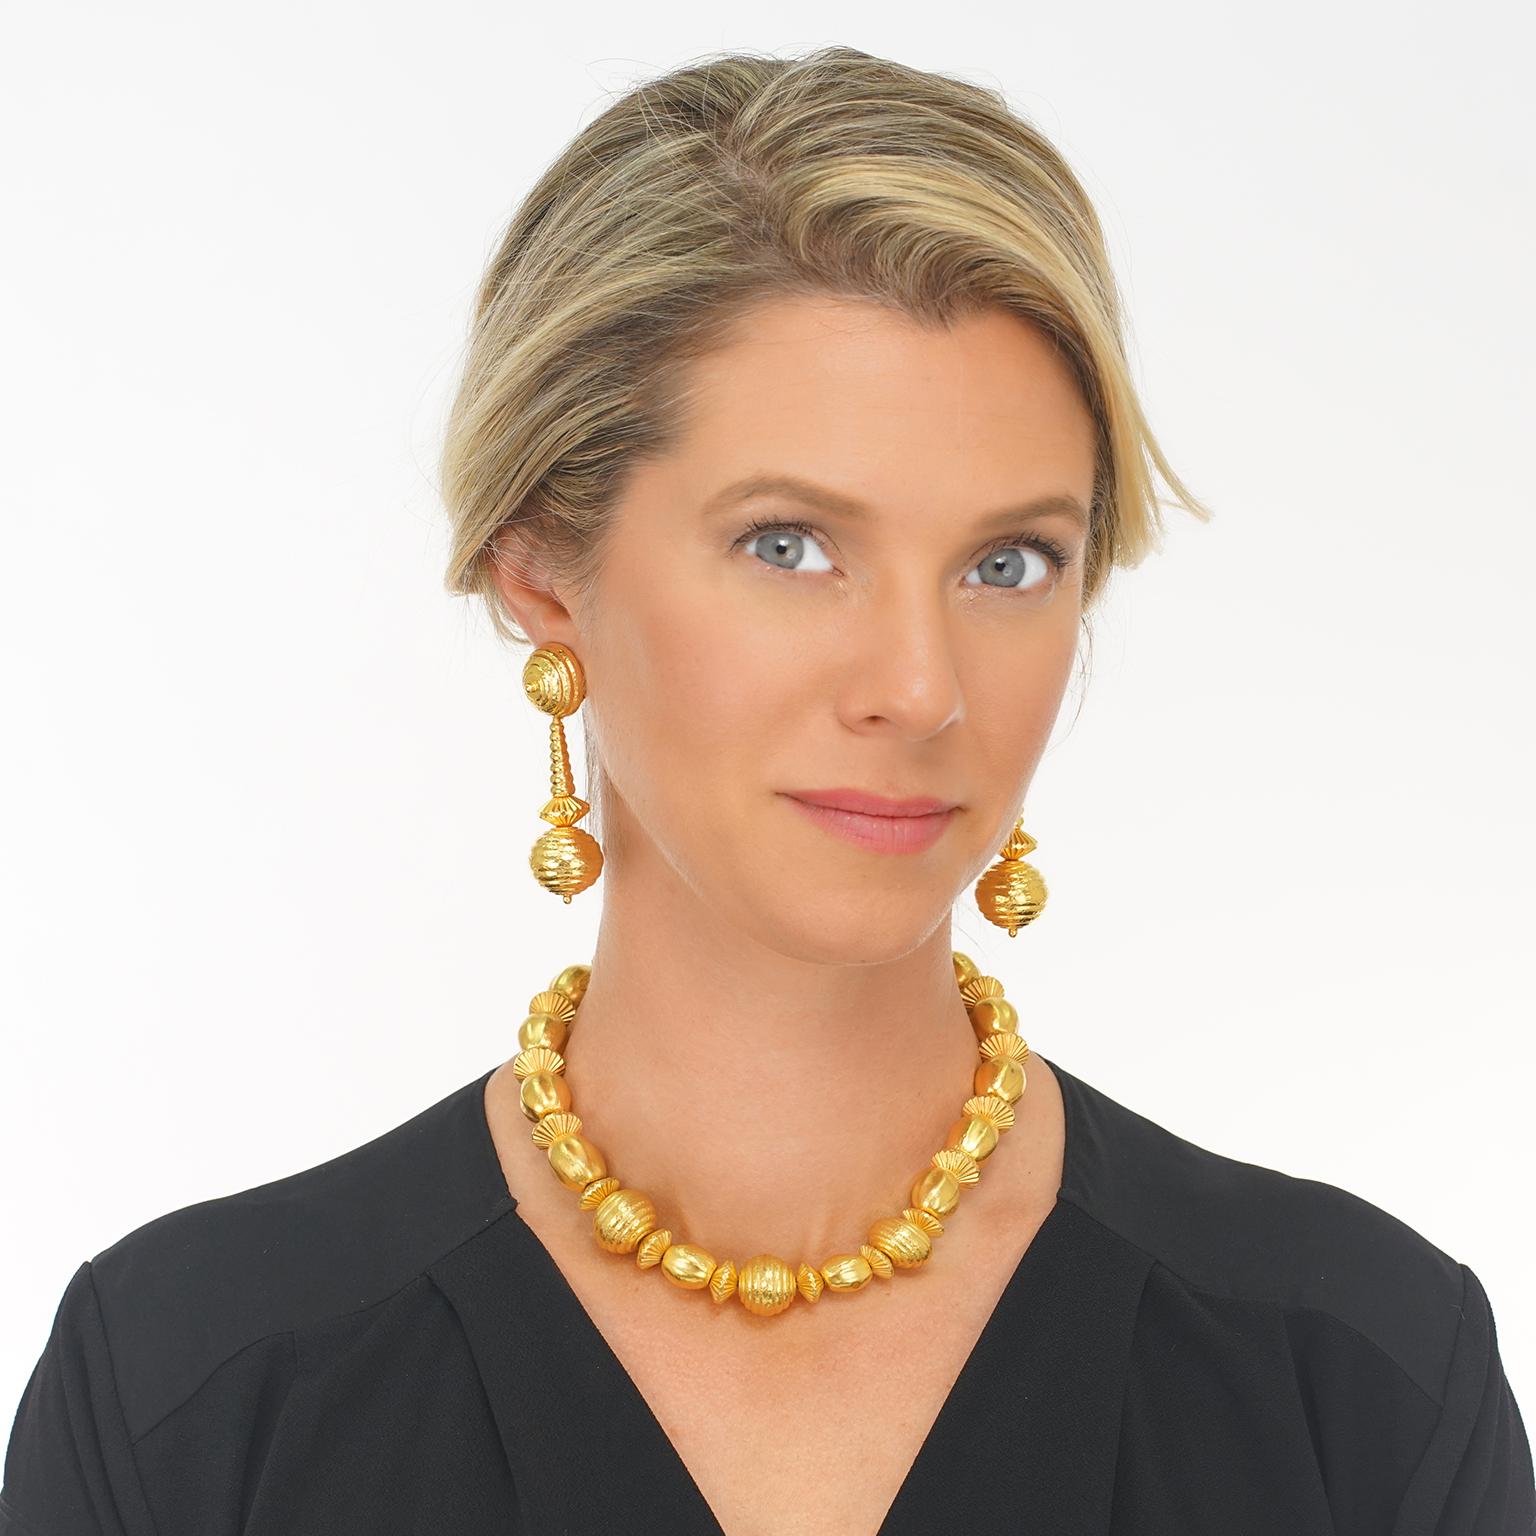 Circa 1960s, 22k, Ilias Lalaounis, Greece.   This boldly stylish gold necklace by Lalaounis revives classic Mycenaean motifs for a look that is as chic as it is timeless. Ilias Lalaounis' vision to create jewelry based on classical, archaic, and